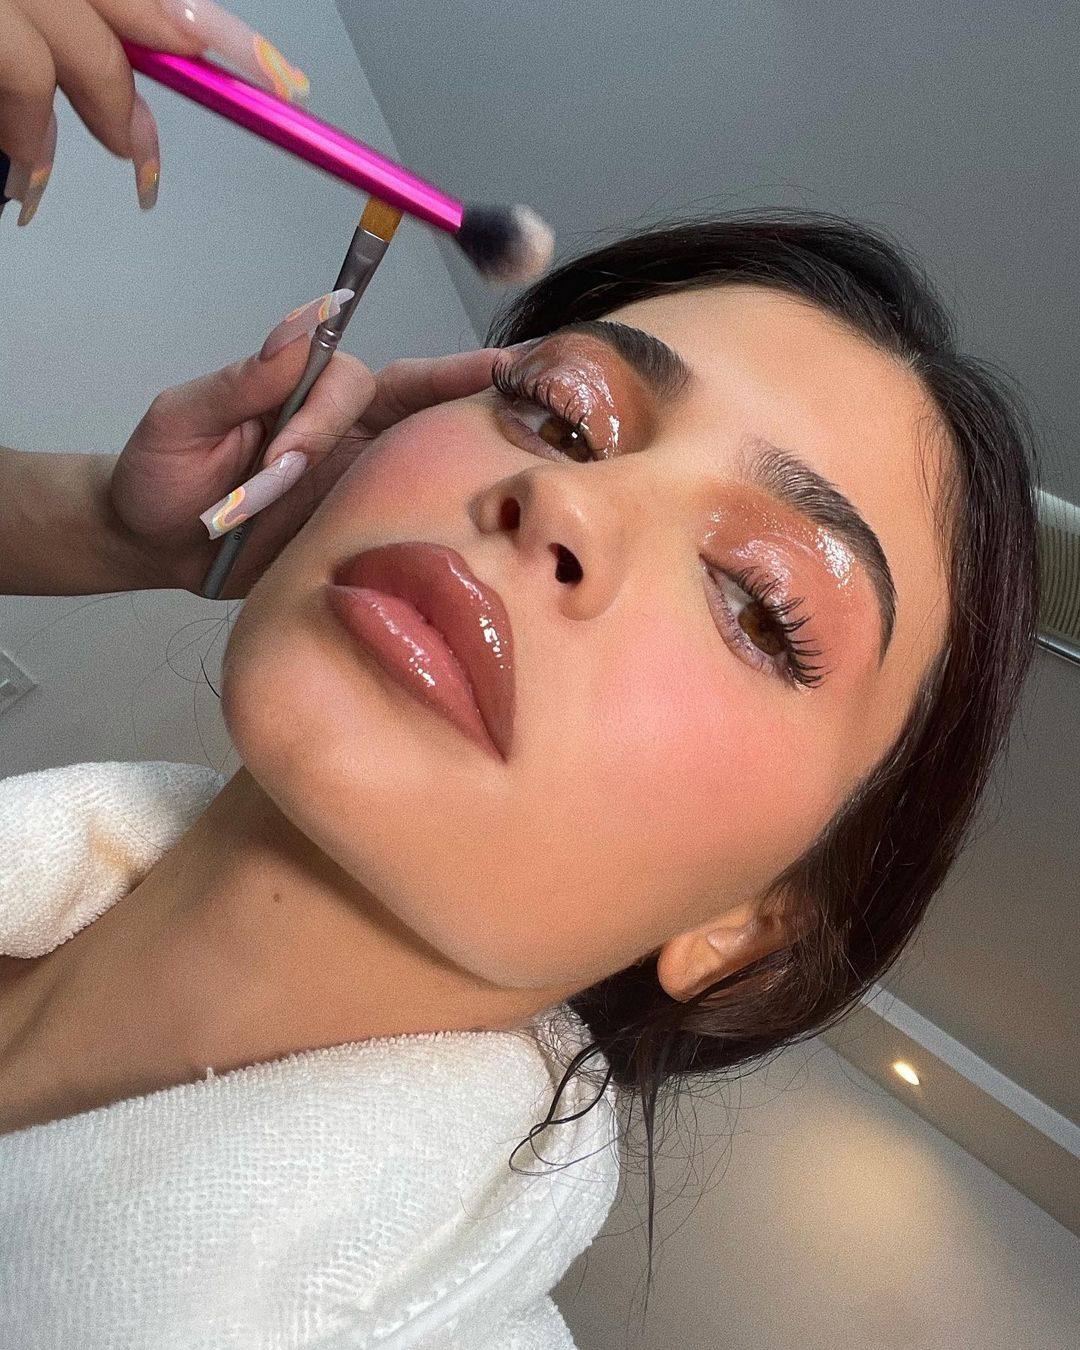 Reality-TV star Kylie Jenner denied having filler put in her lips, before finally admitting to the procedure. Fans’ self-esteem can be affected if they measure themselves against unrealistic beauty standards, experts say.